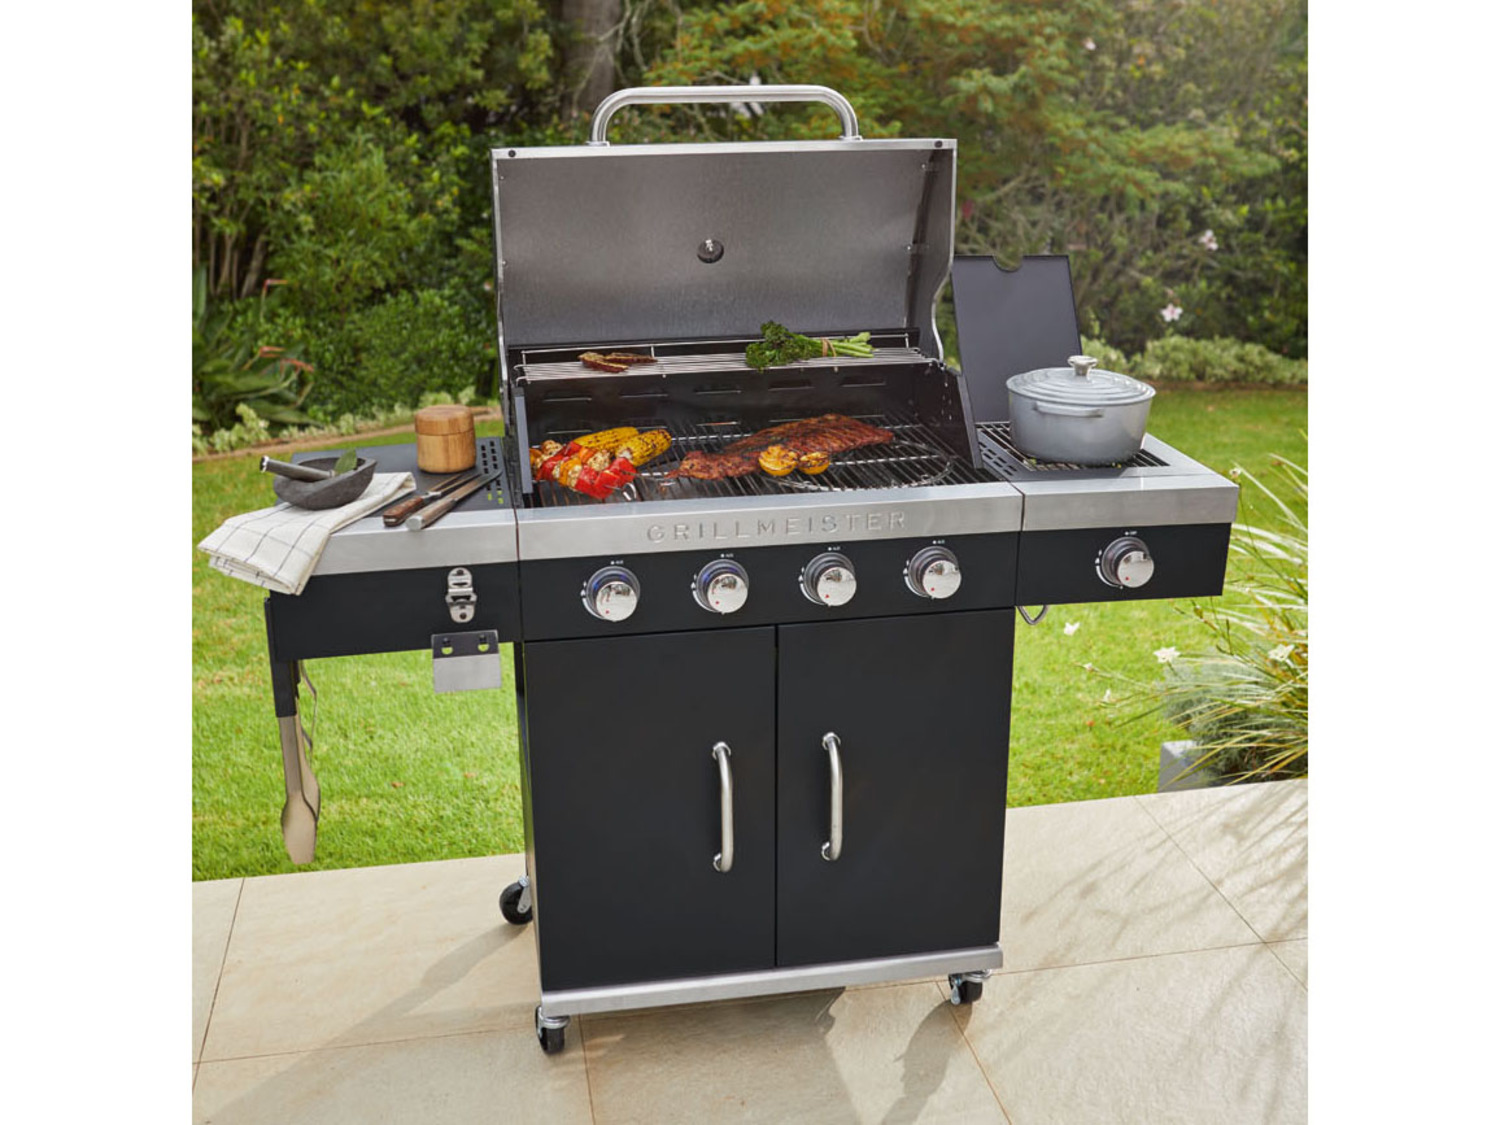 GRILLMEISTER Gasgrill, kW 19,7 4plus1 | Brenner, LIDL